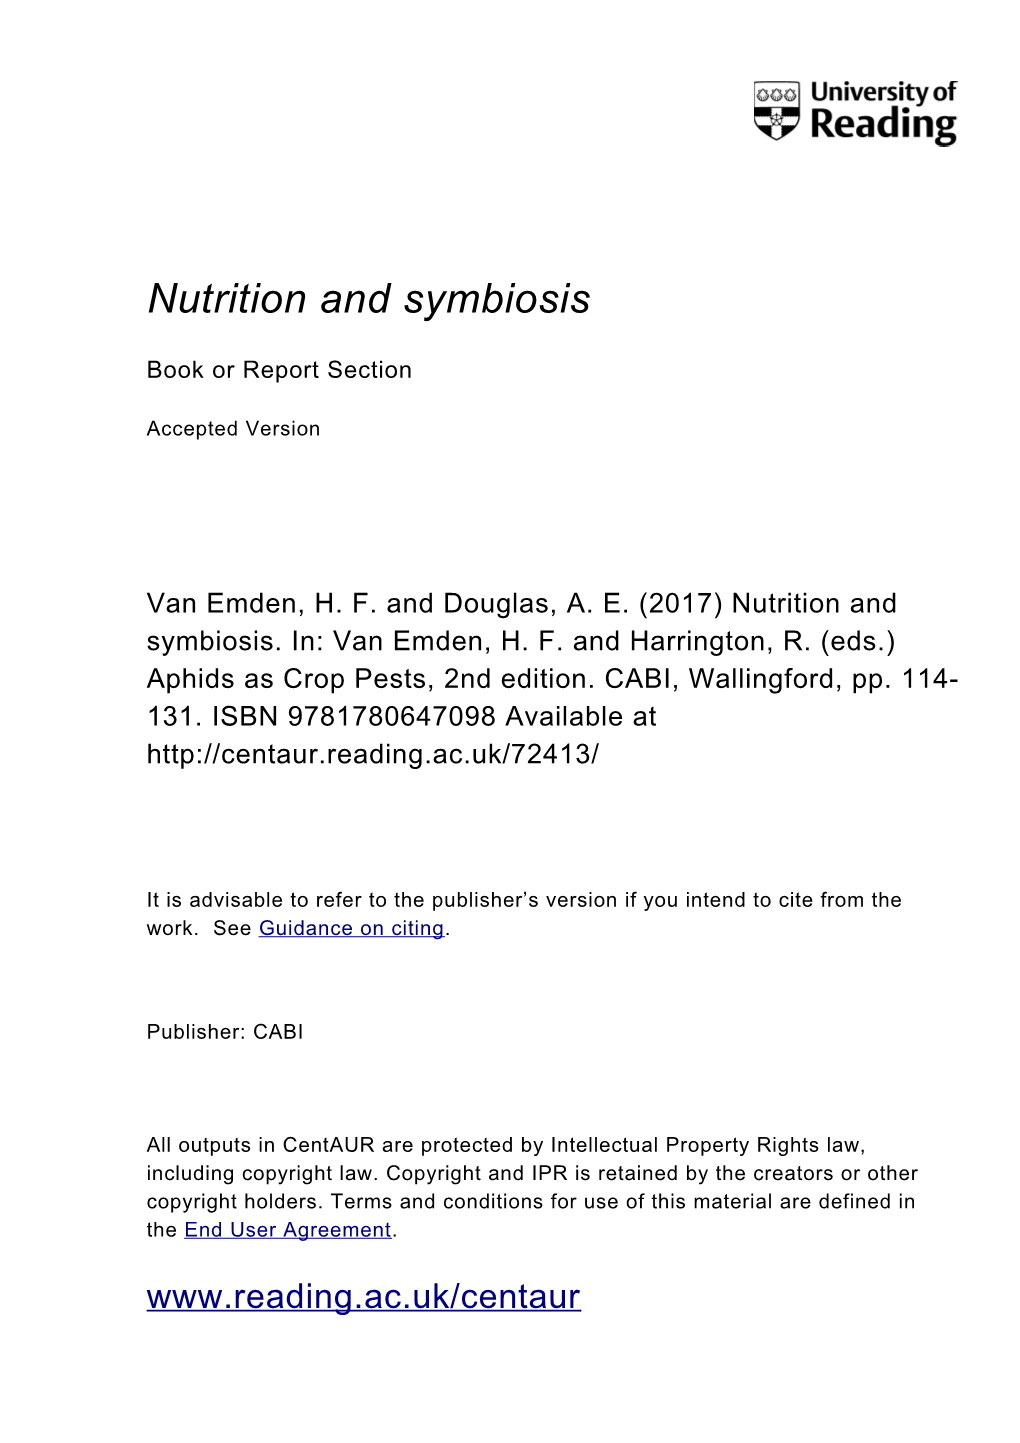 Nutrition and Symbiosis